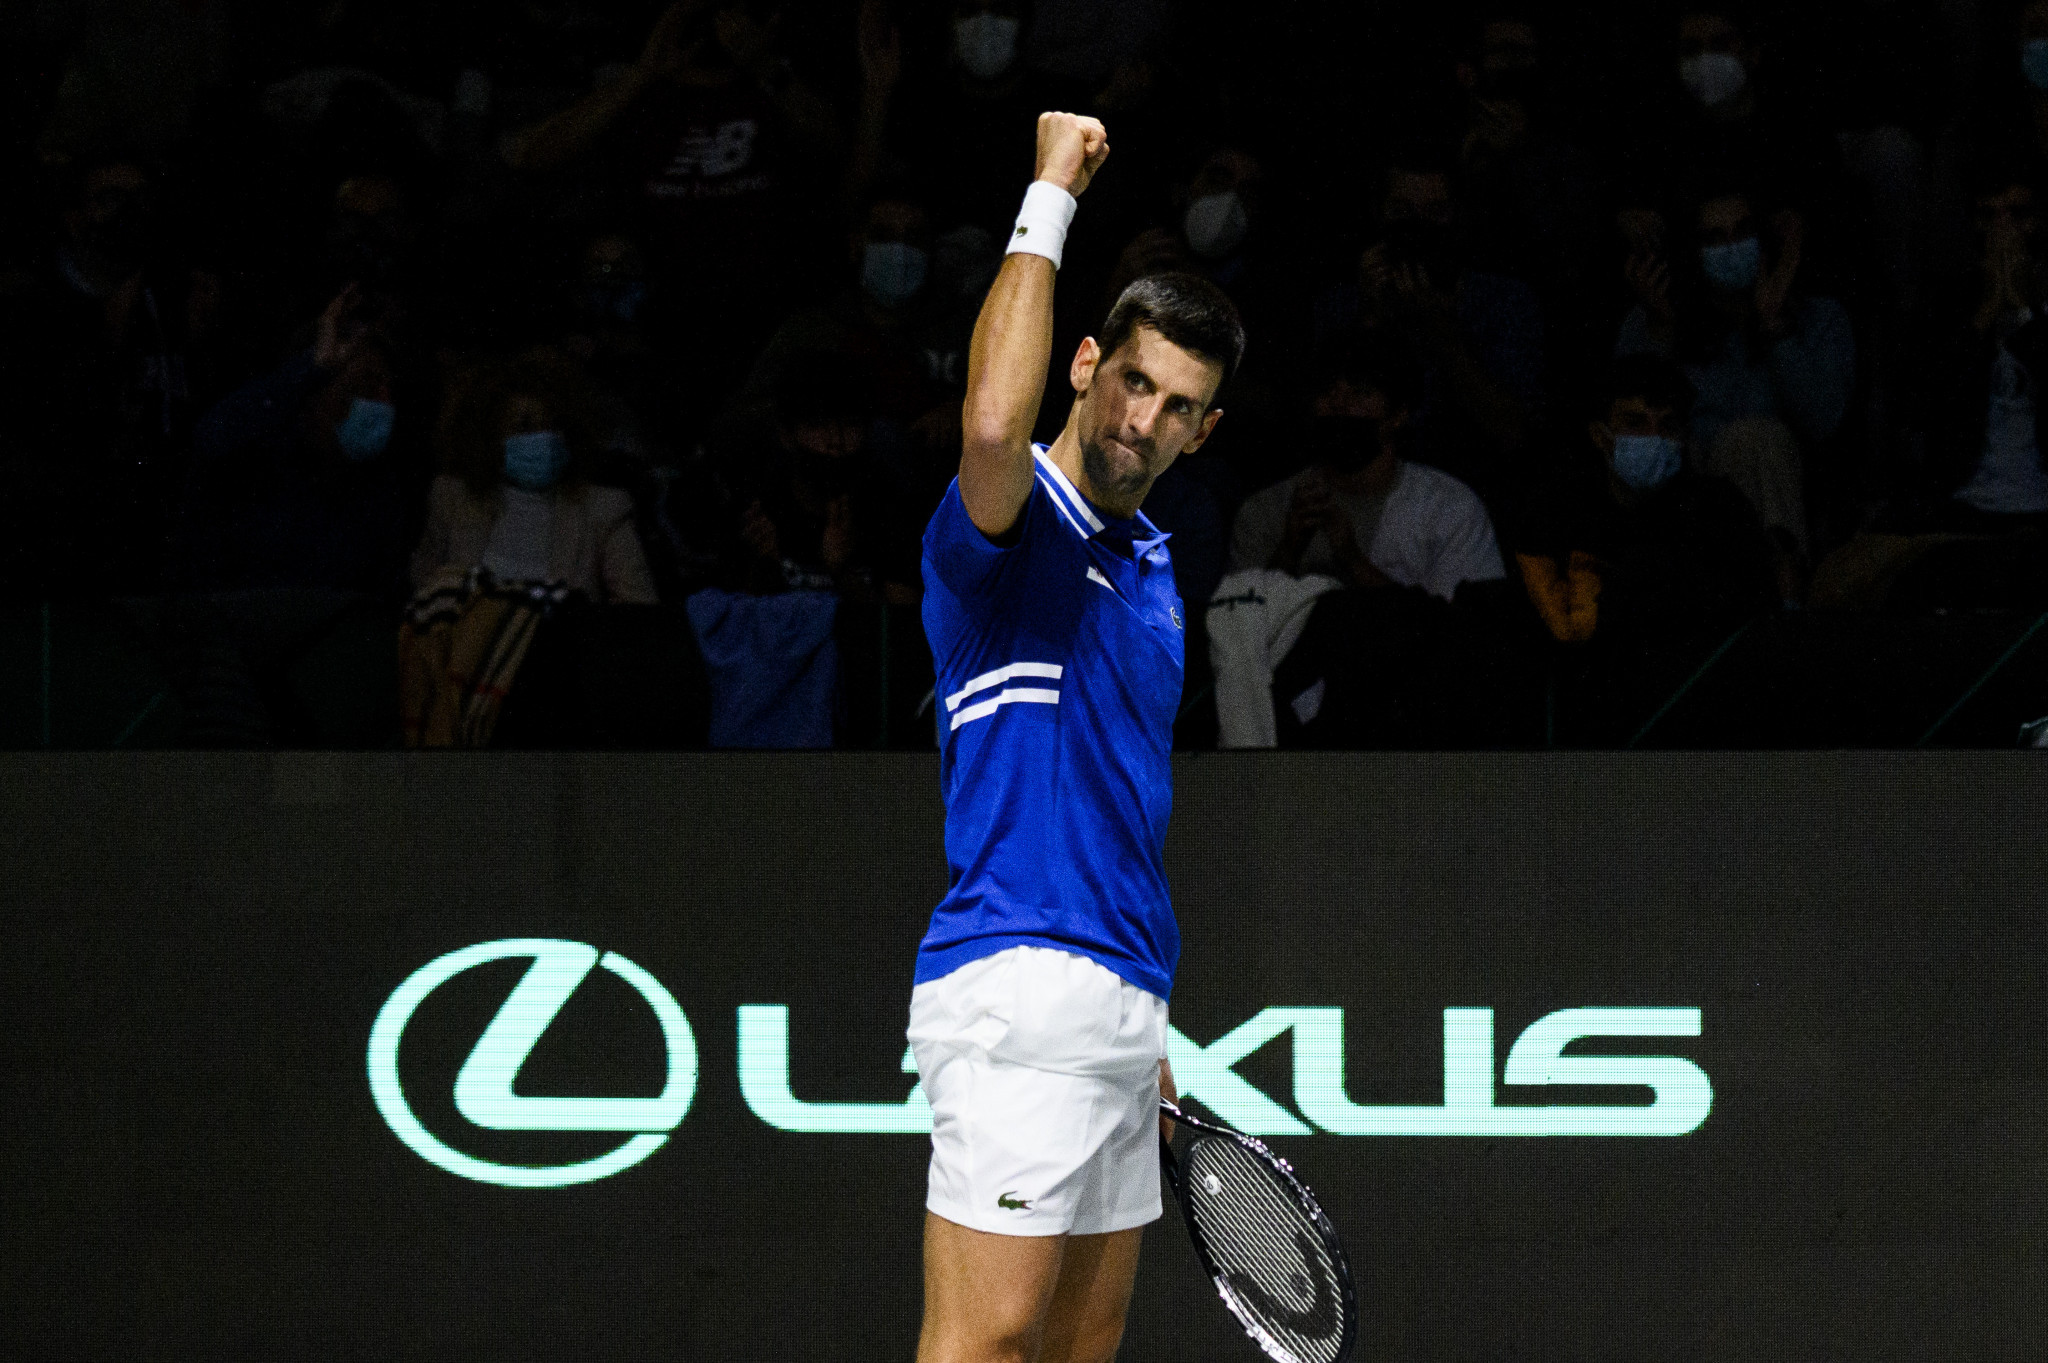 Team mate says Djokovic still hopes to compete at Australian Open despite ATP Cup absence